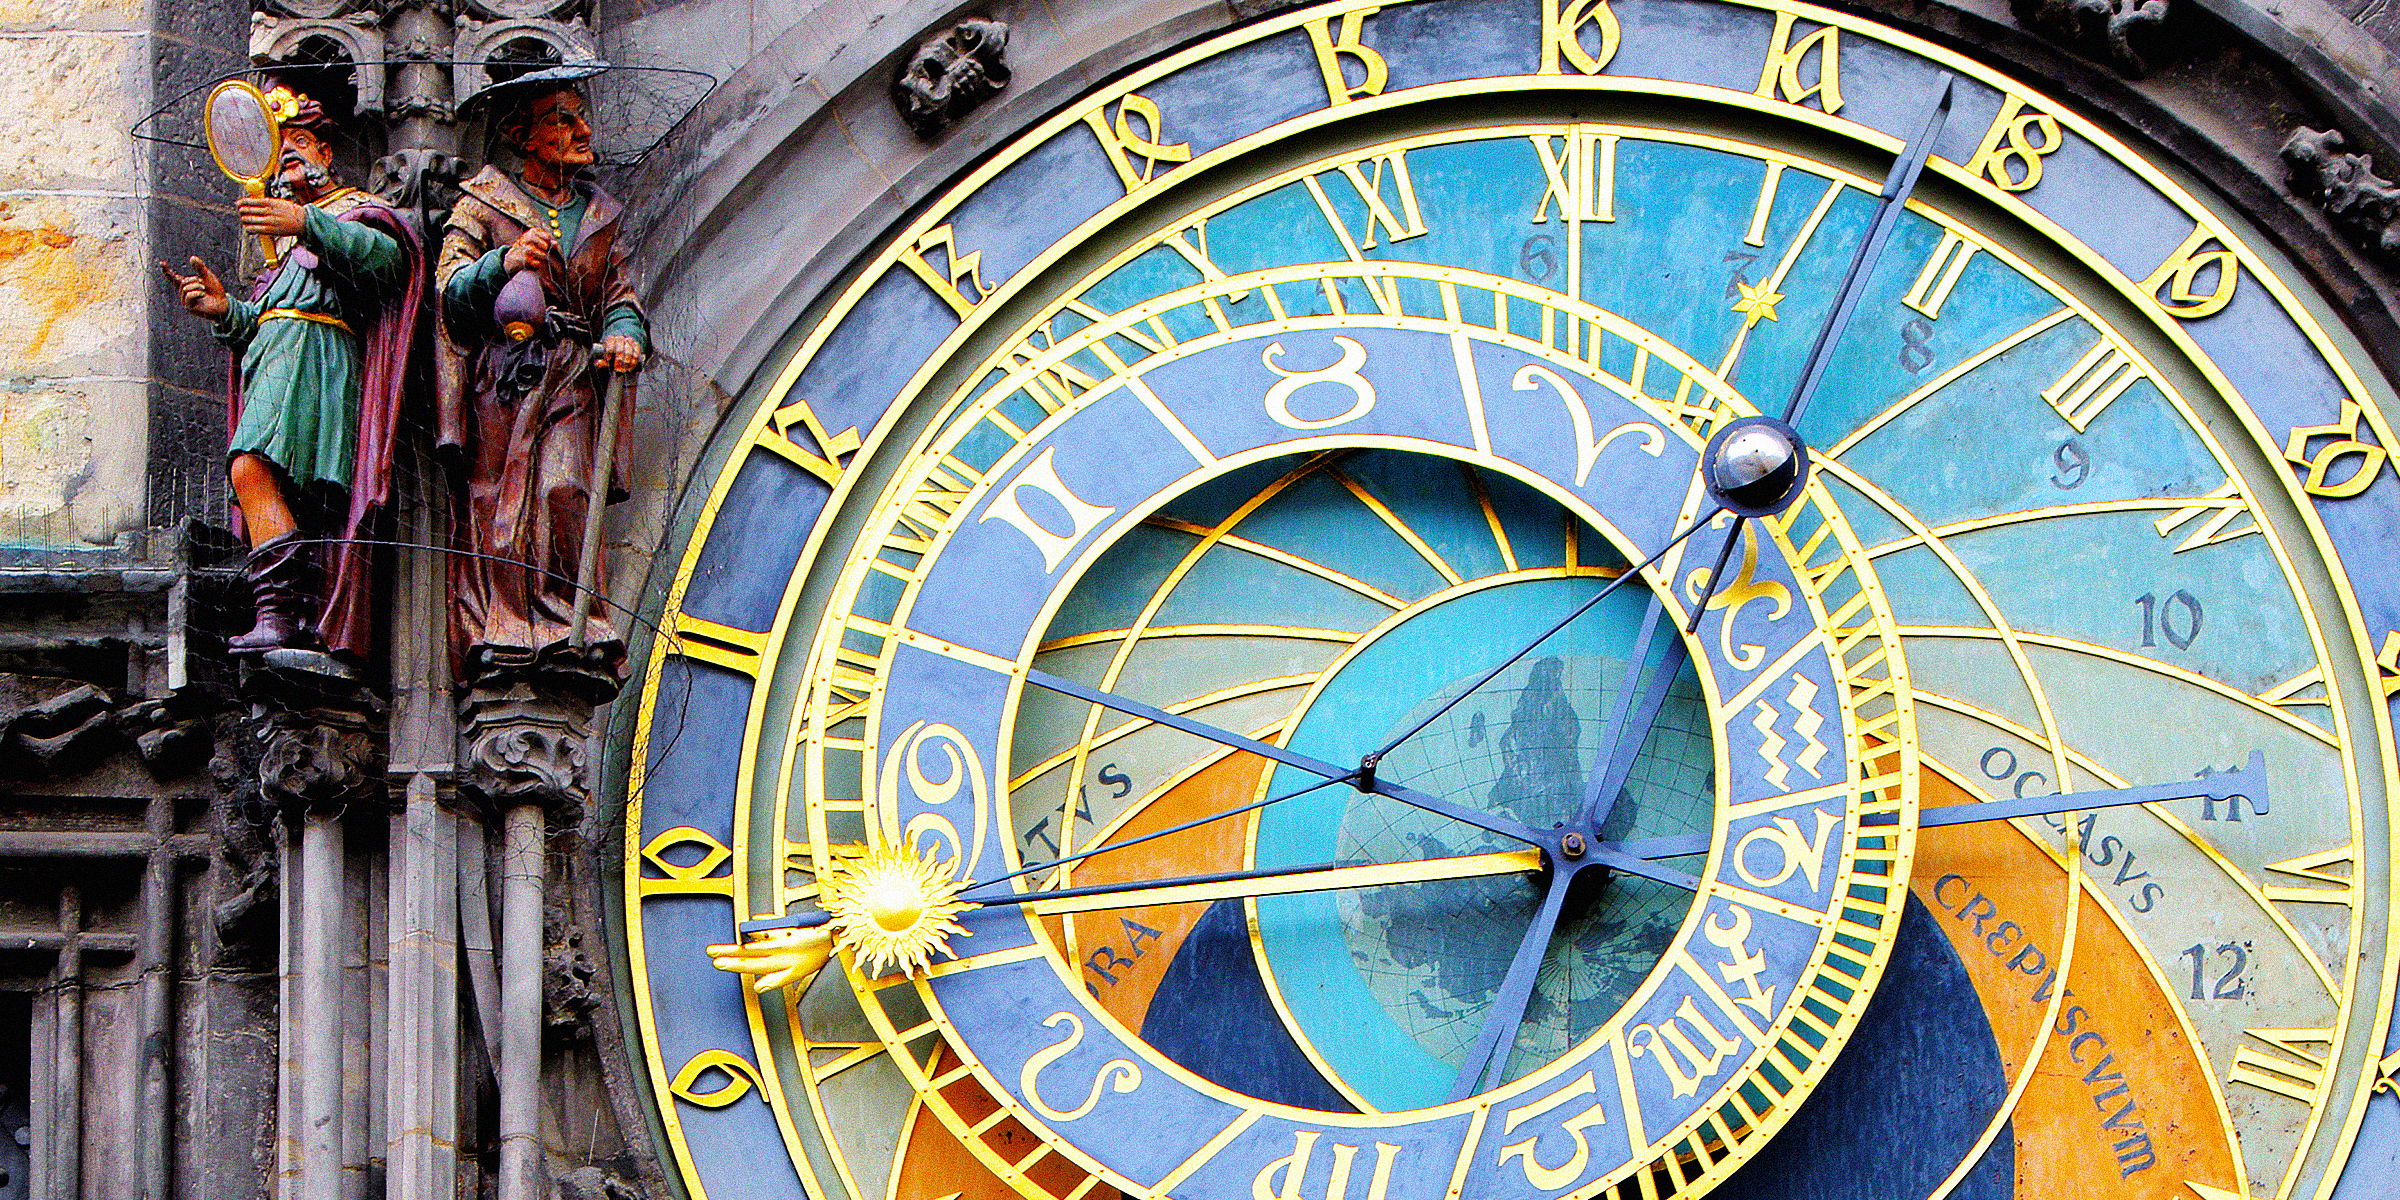 A vintage clock with zodiac signs | Source: Shutterstock